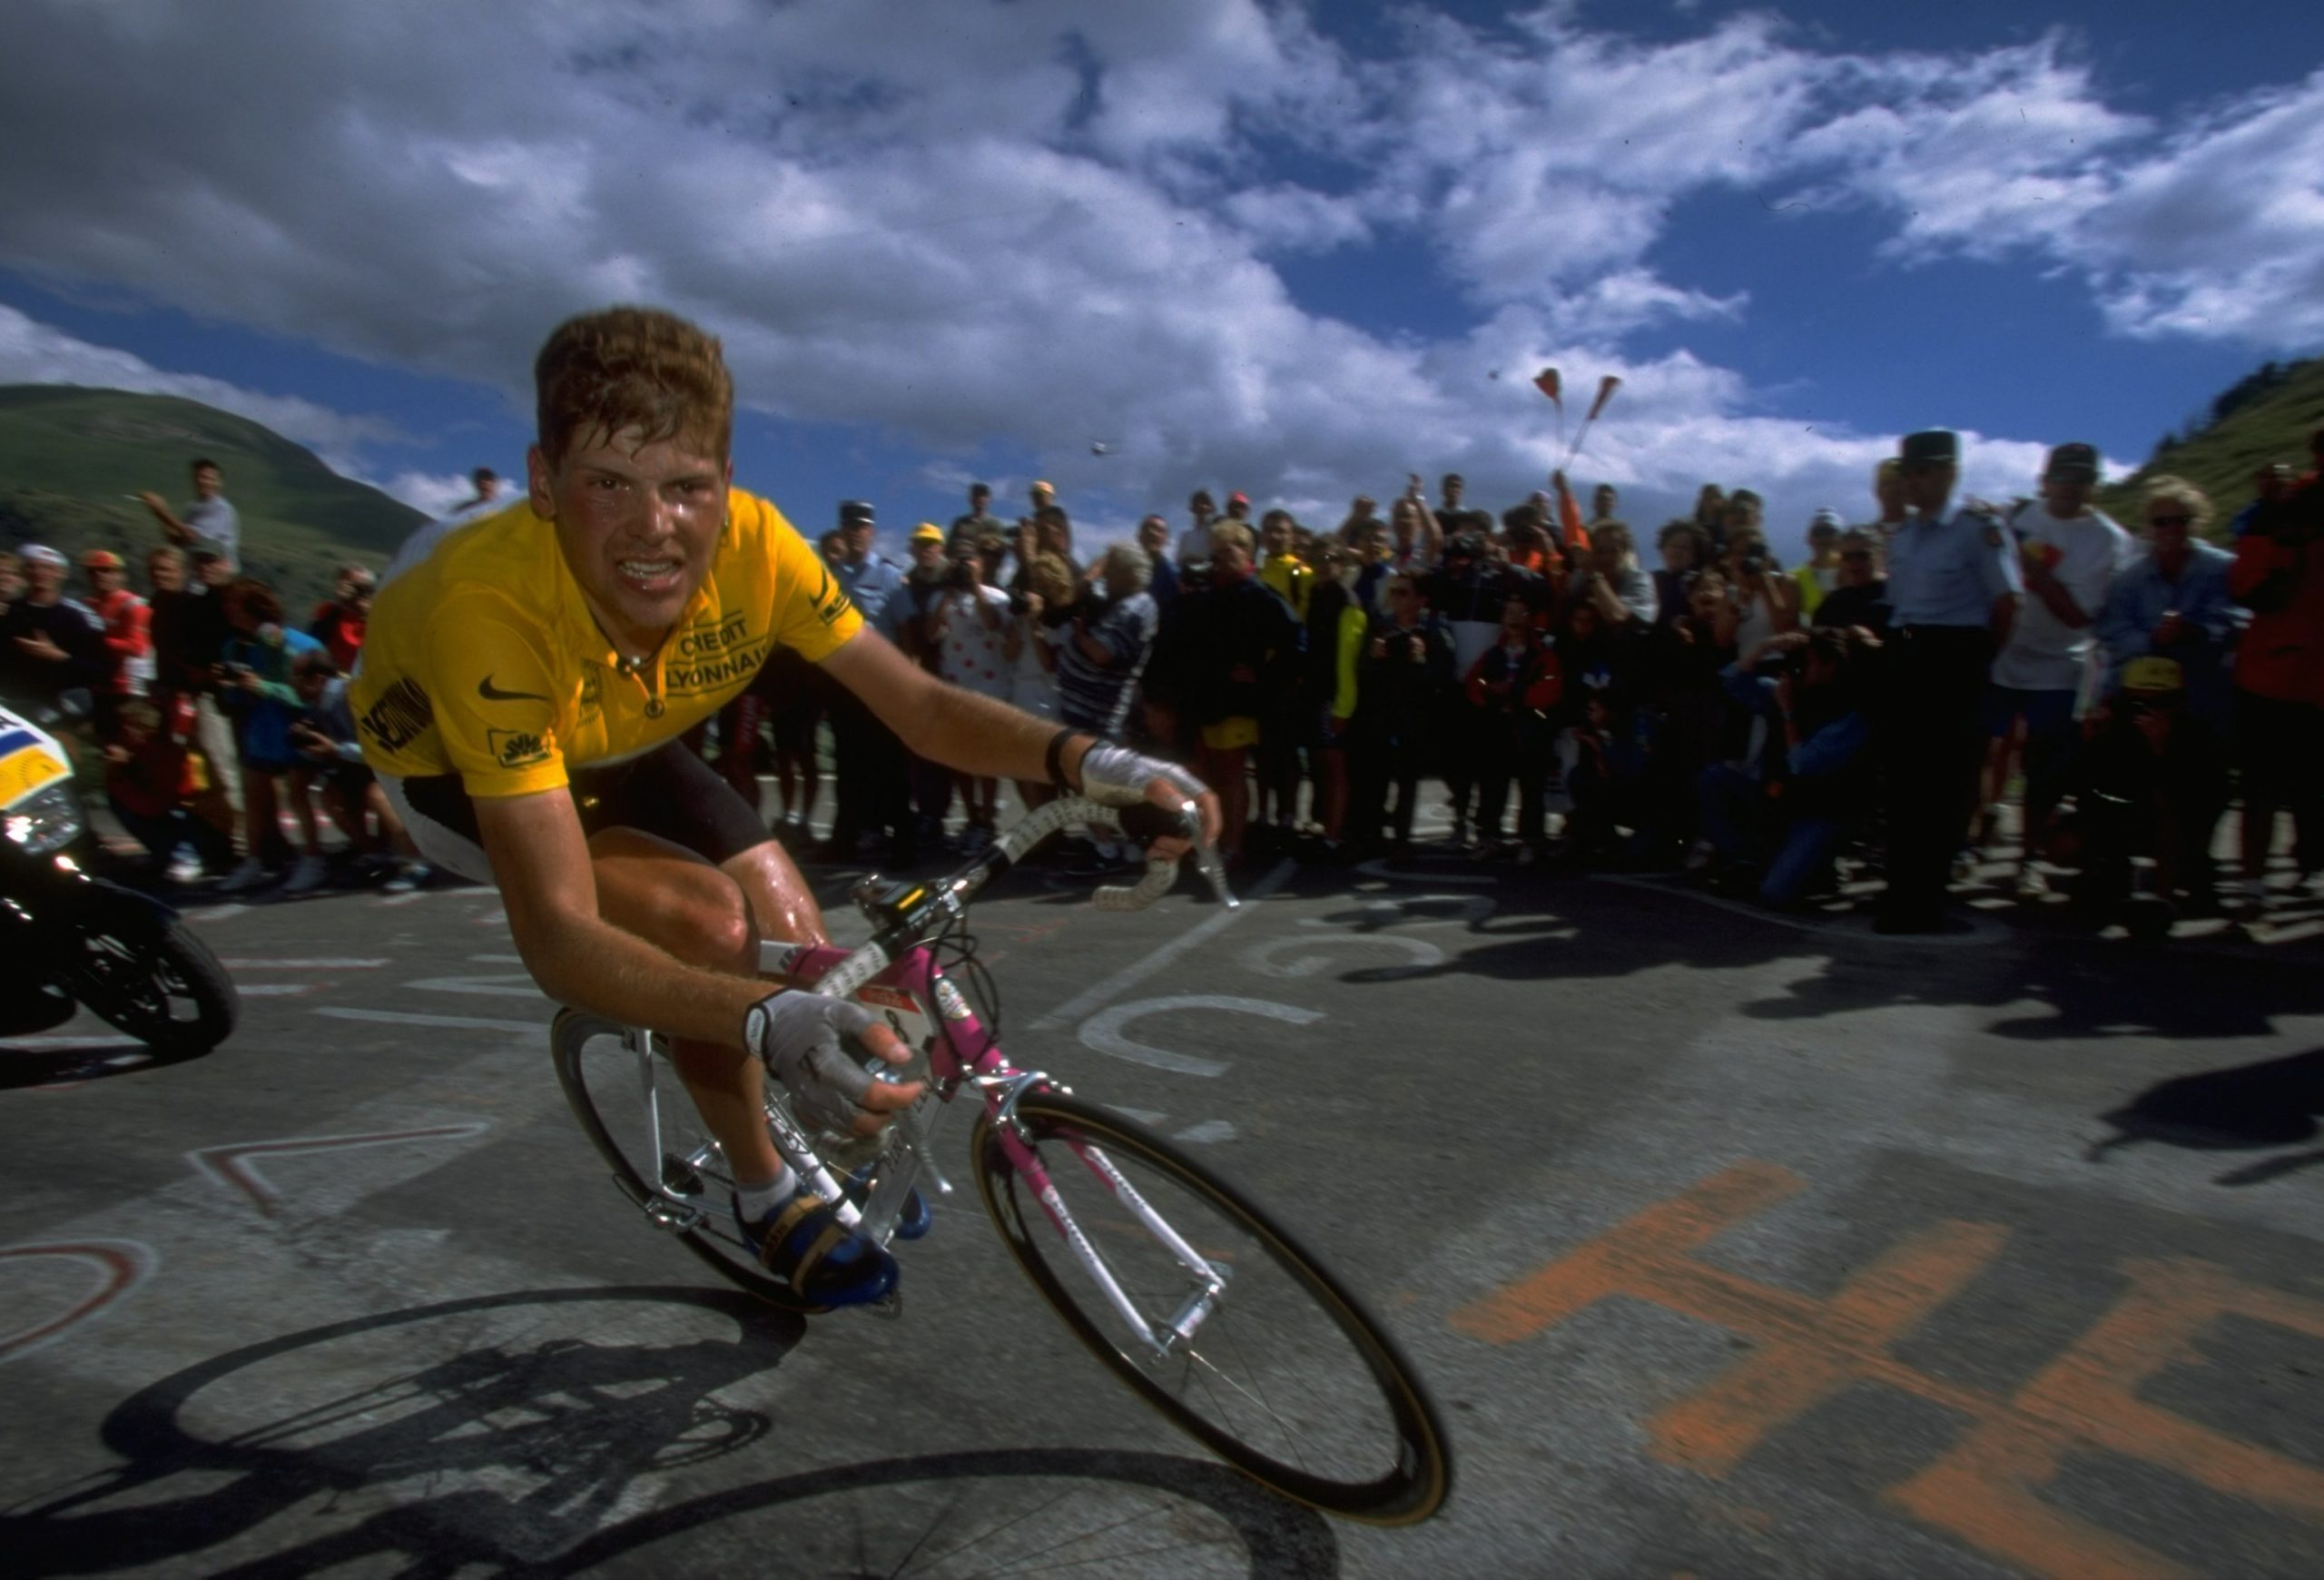 Jan Ullrich on his way to winning the 1997 Tour de France